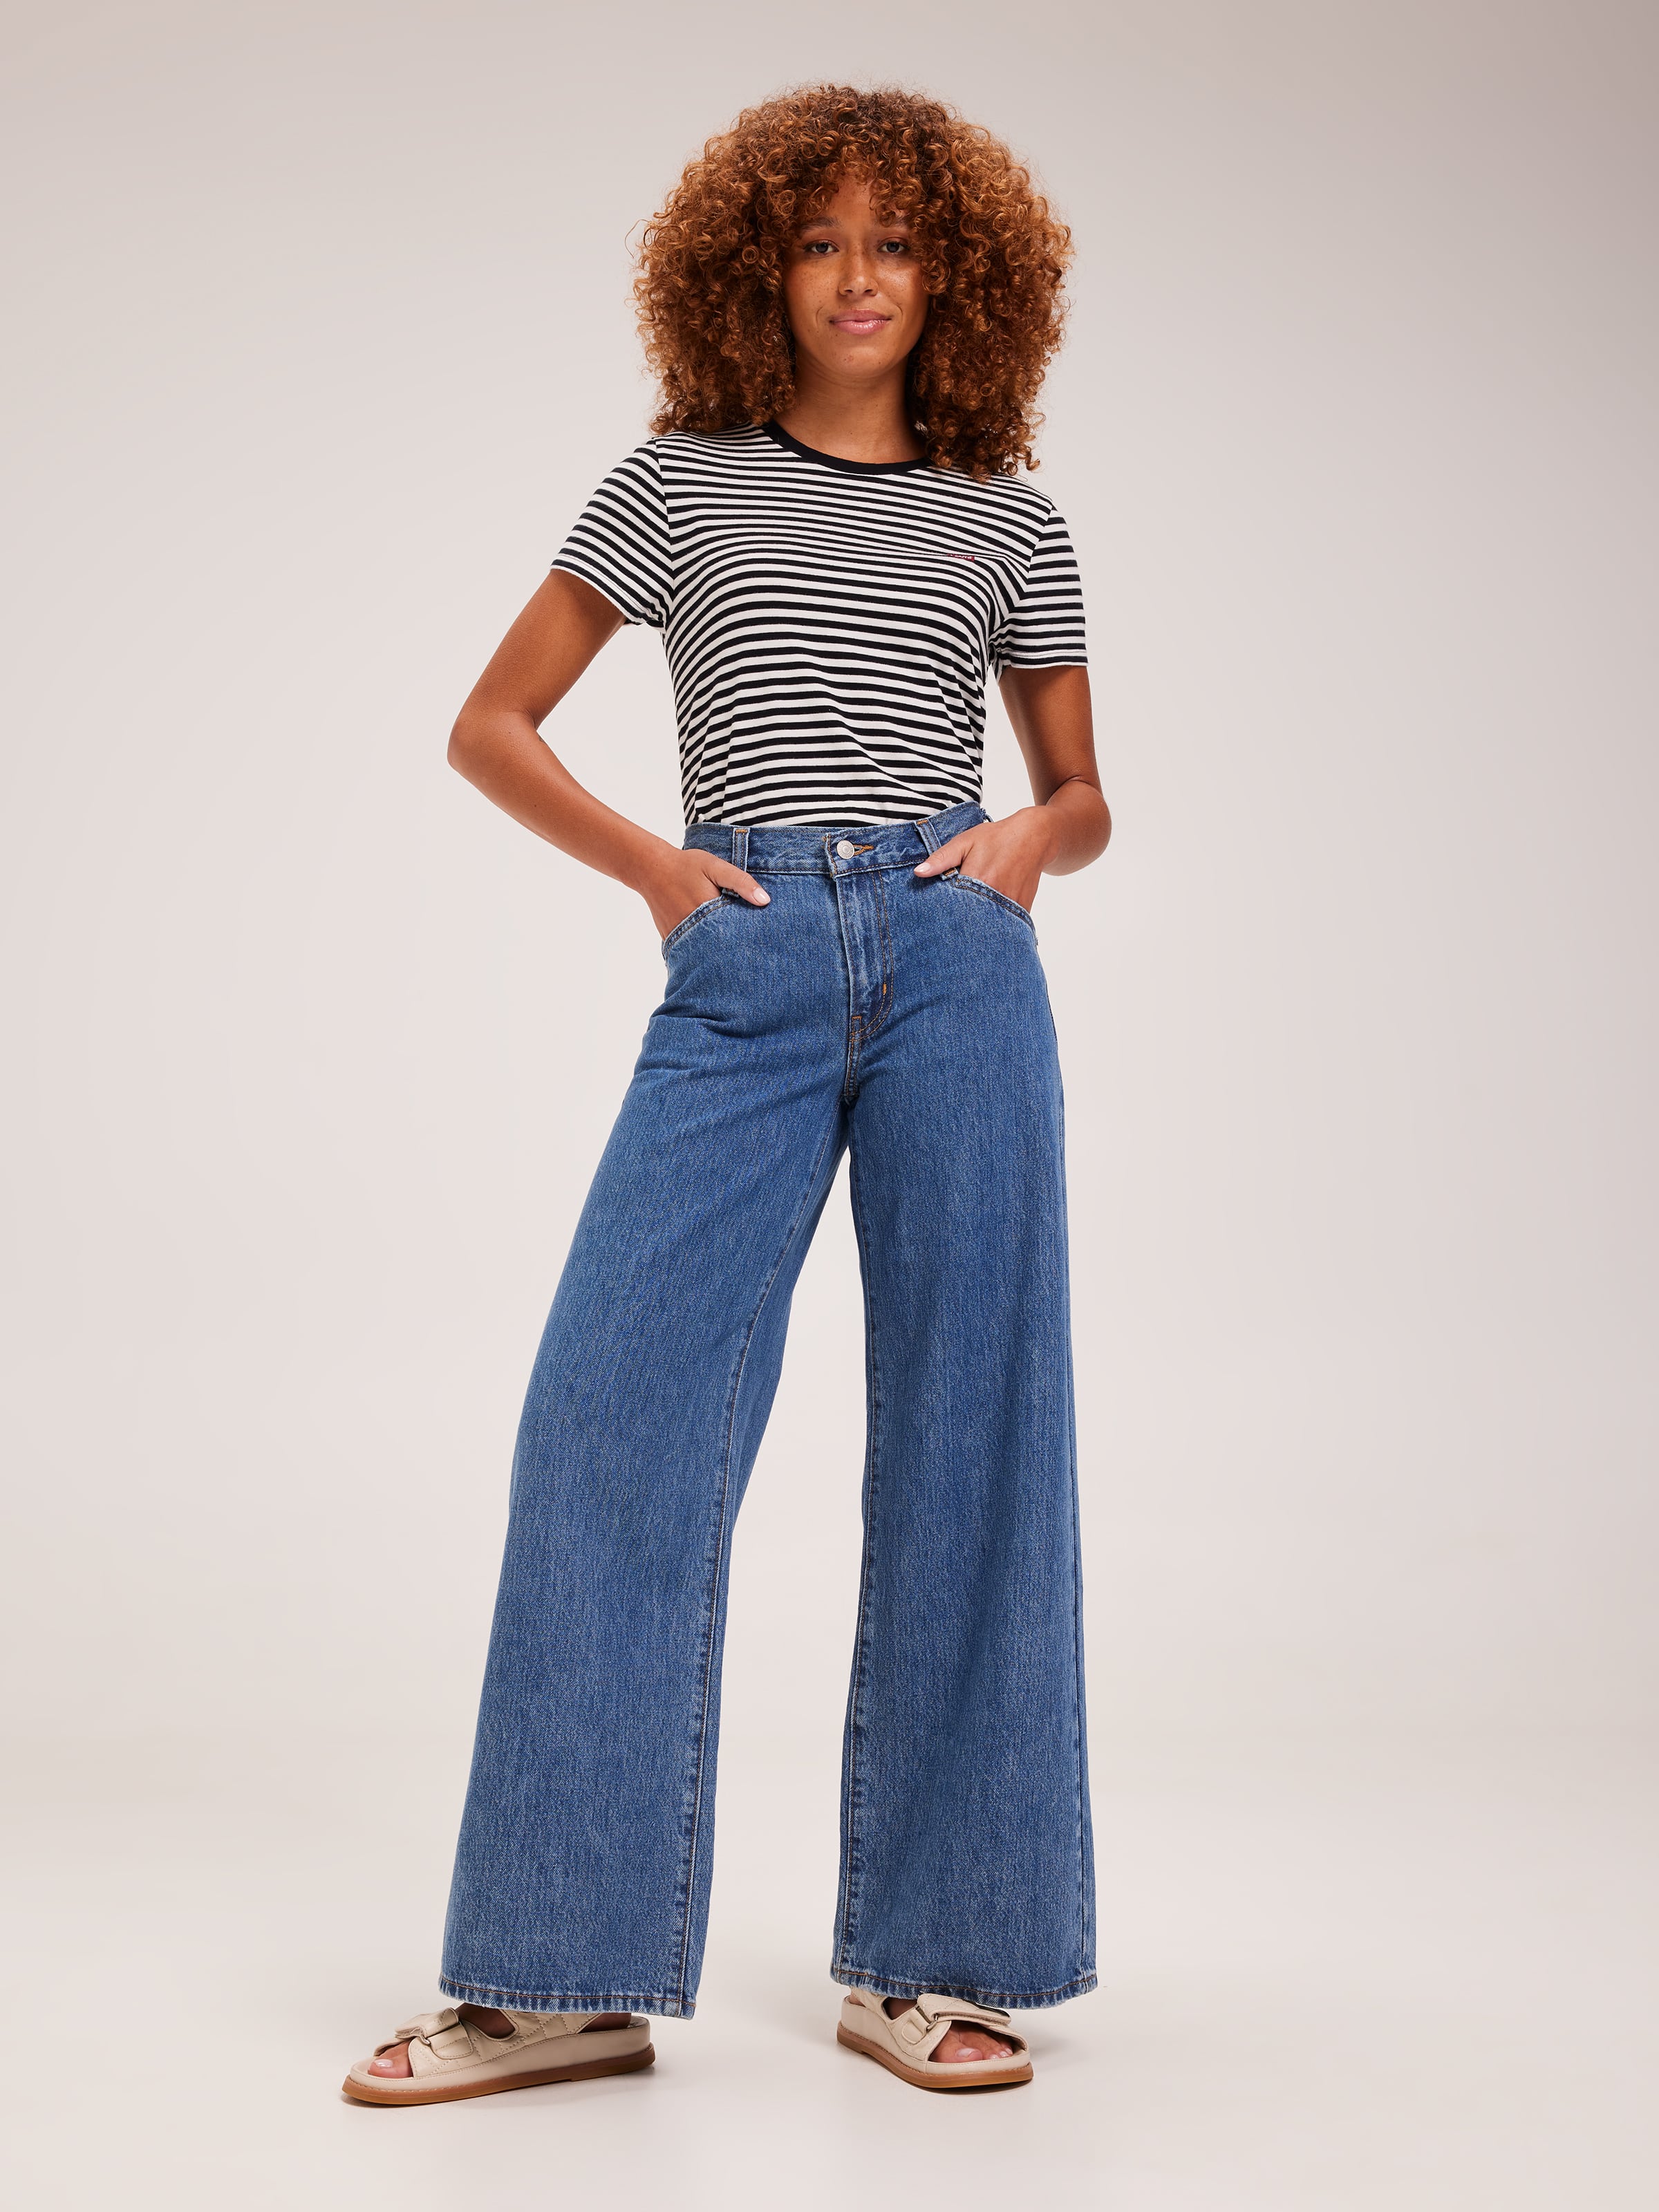 94 Baggy Wide Leg Jean In Take Chances - Just Jeans Online